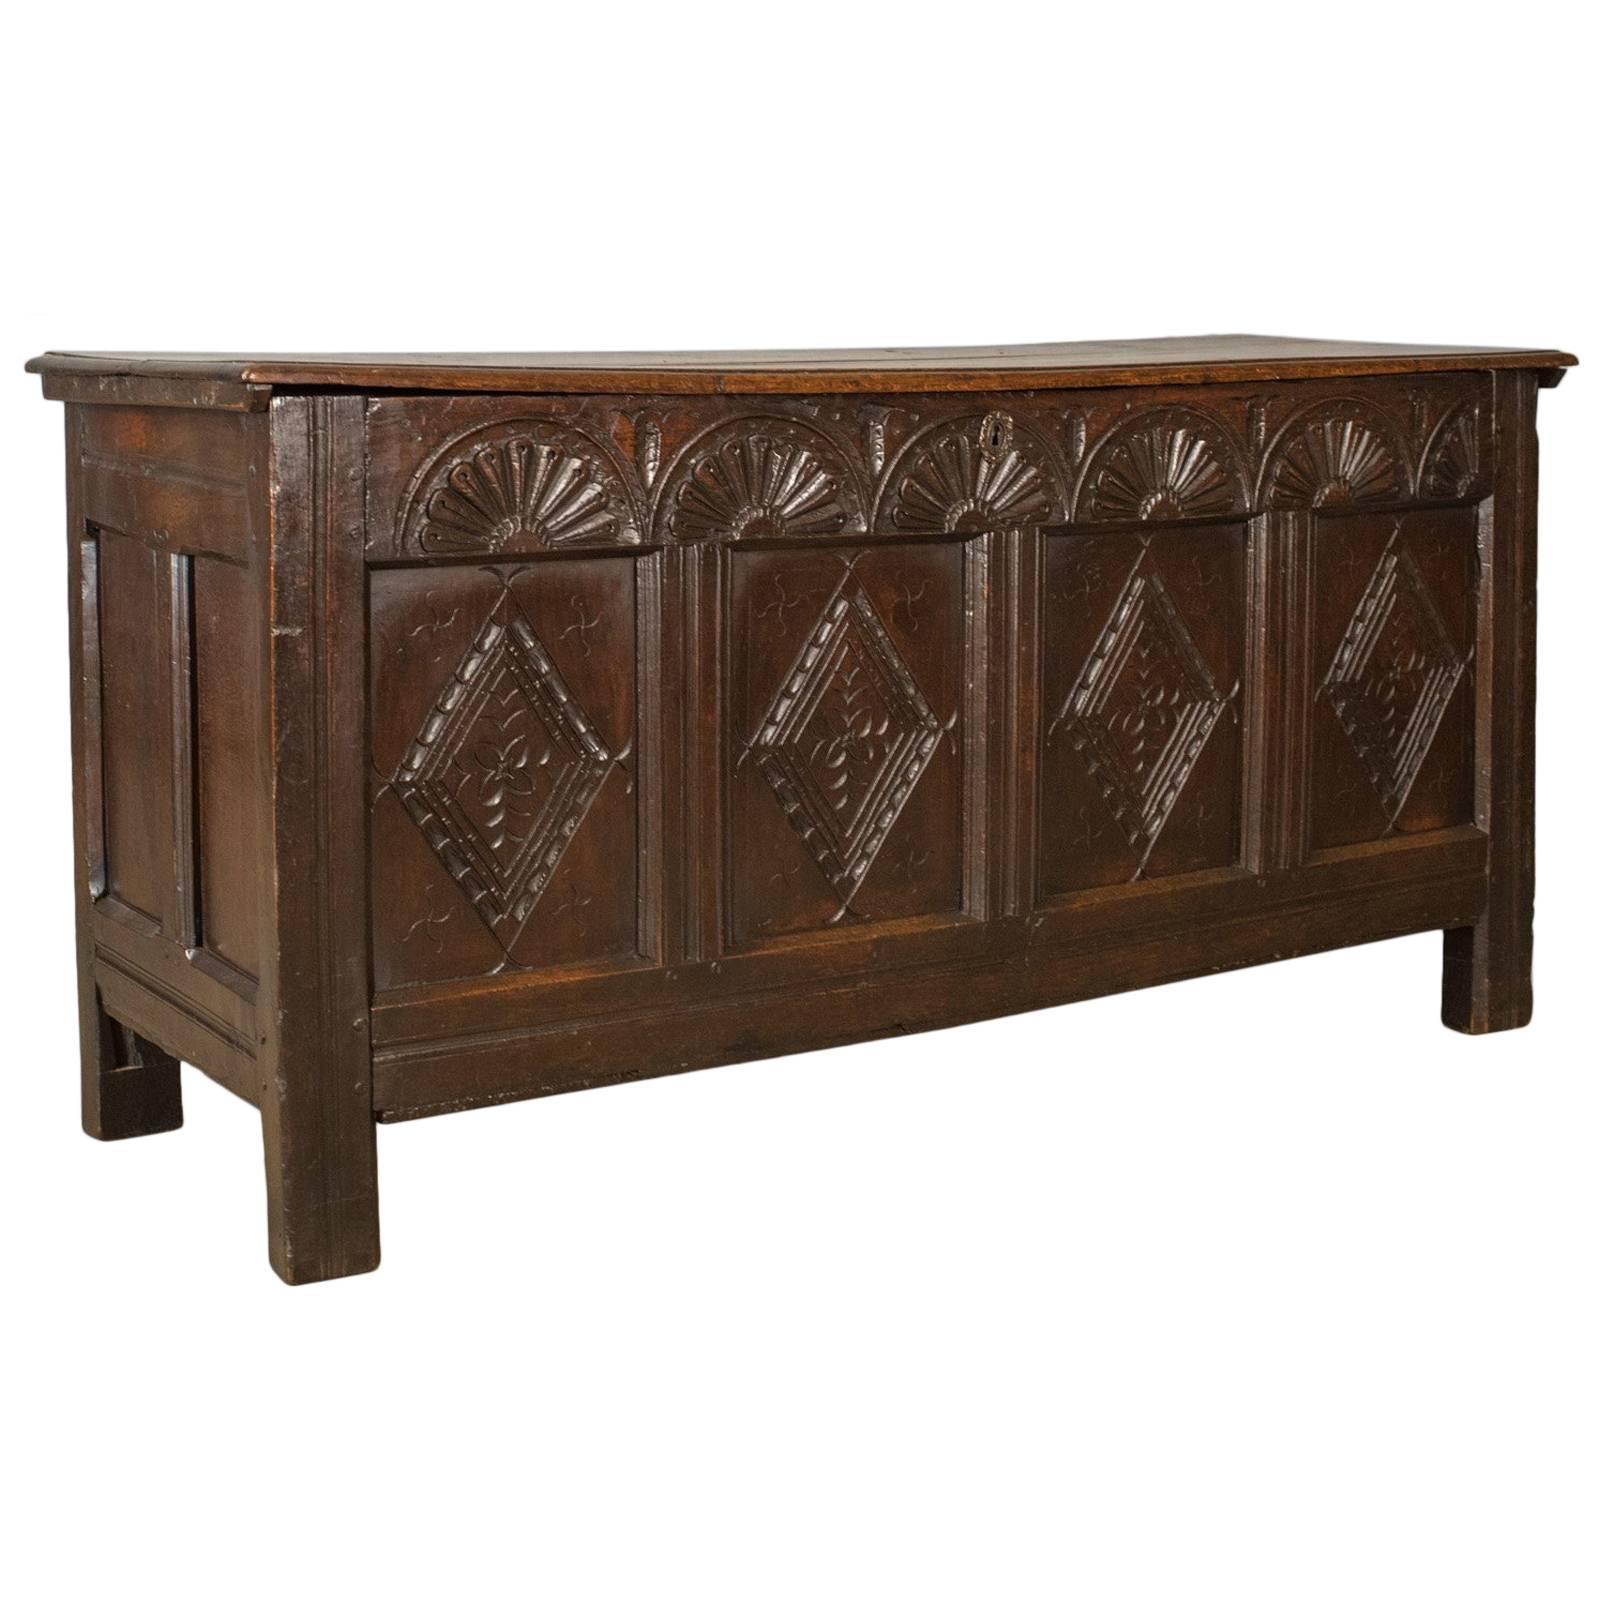 Antique Coffer, Large, English Oak, Joined Chest, Charles II Trunk, circa 1680 